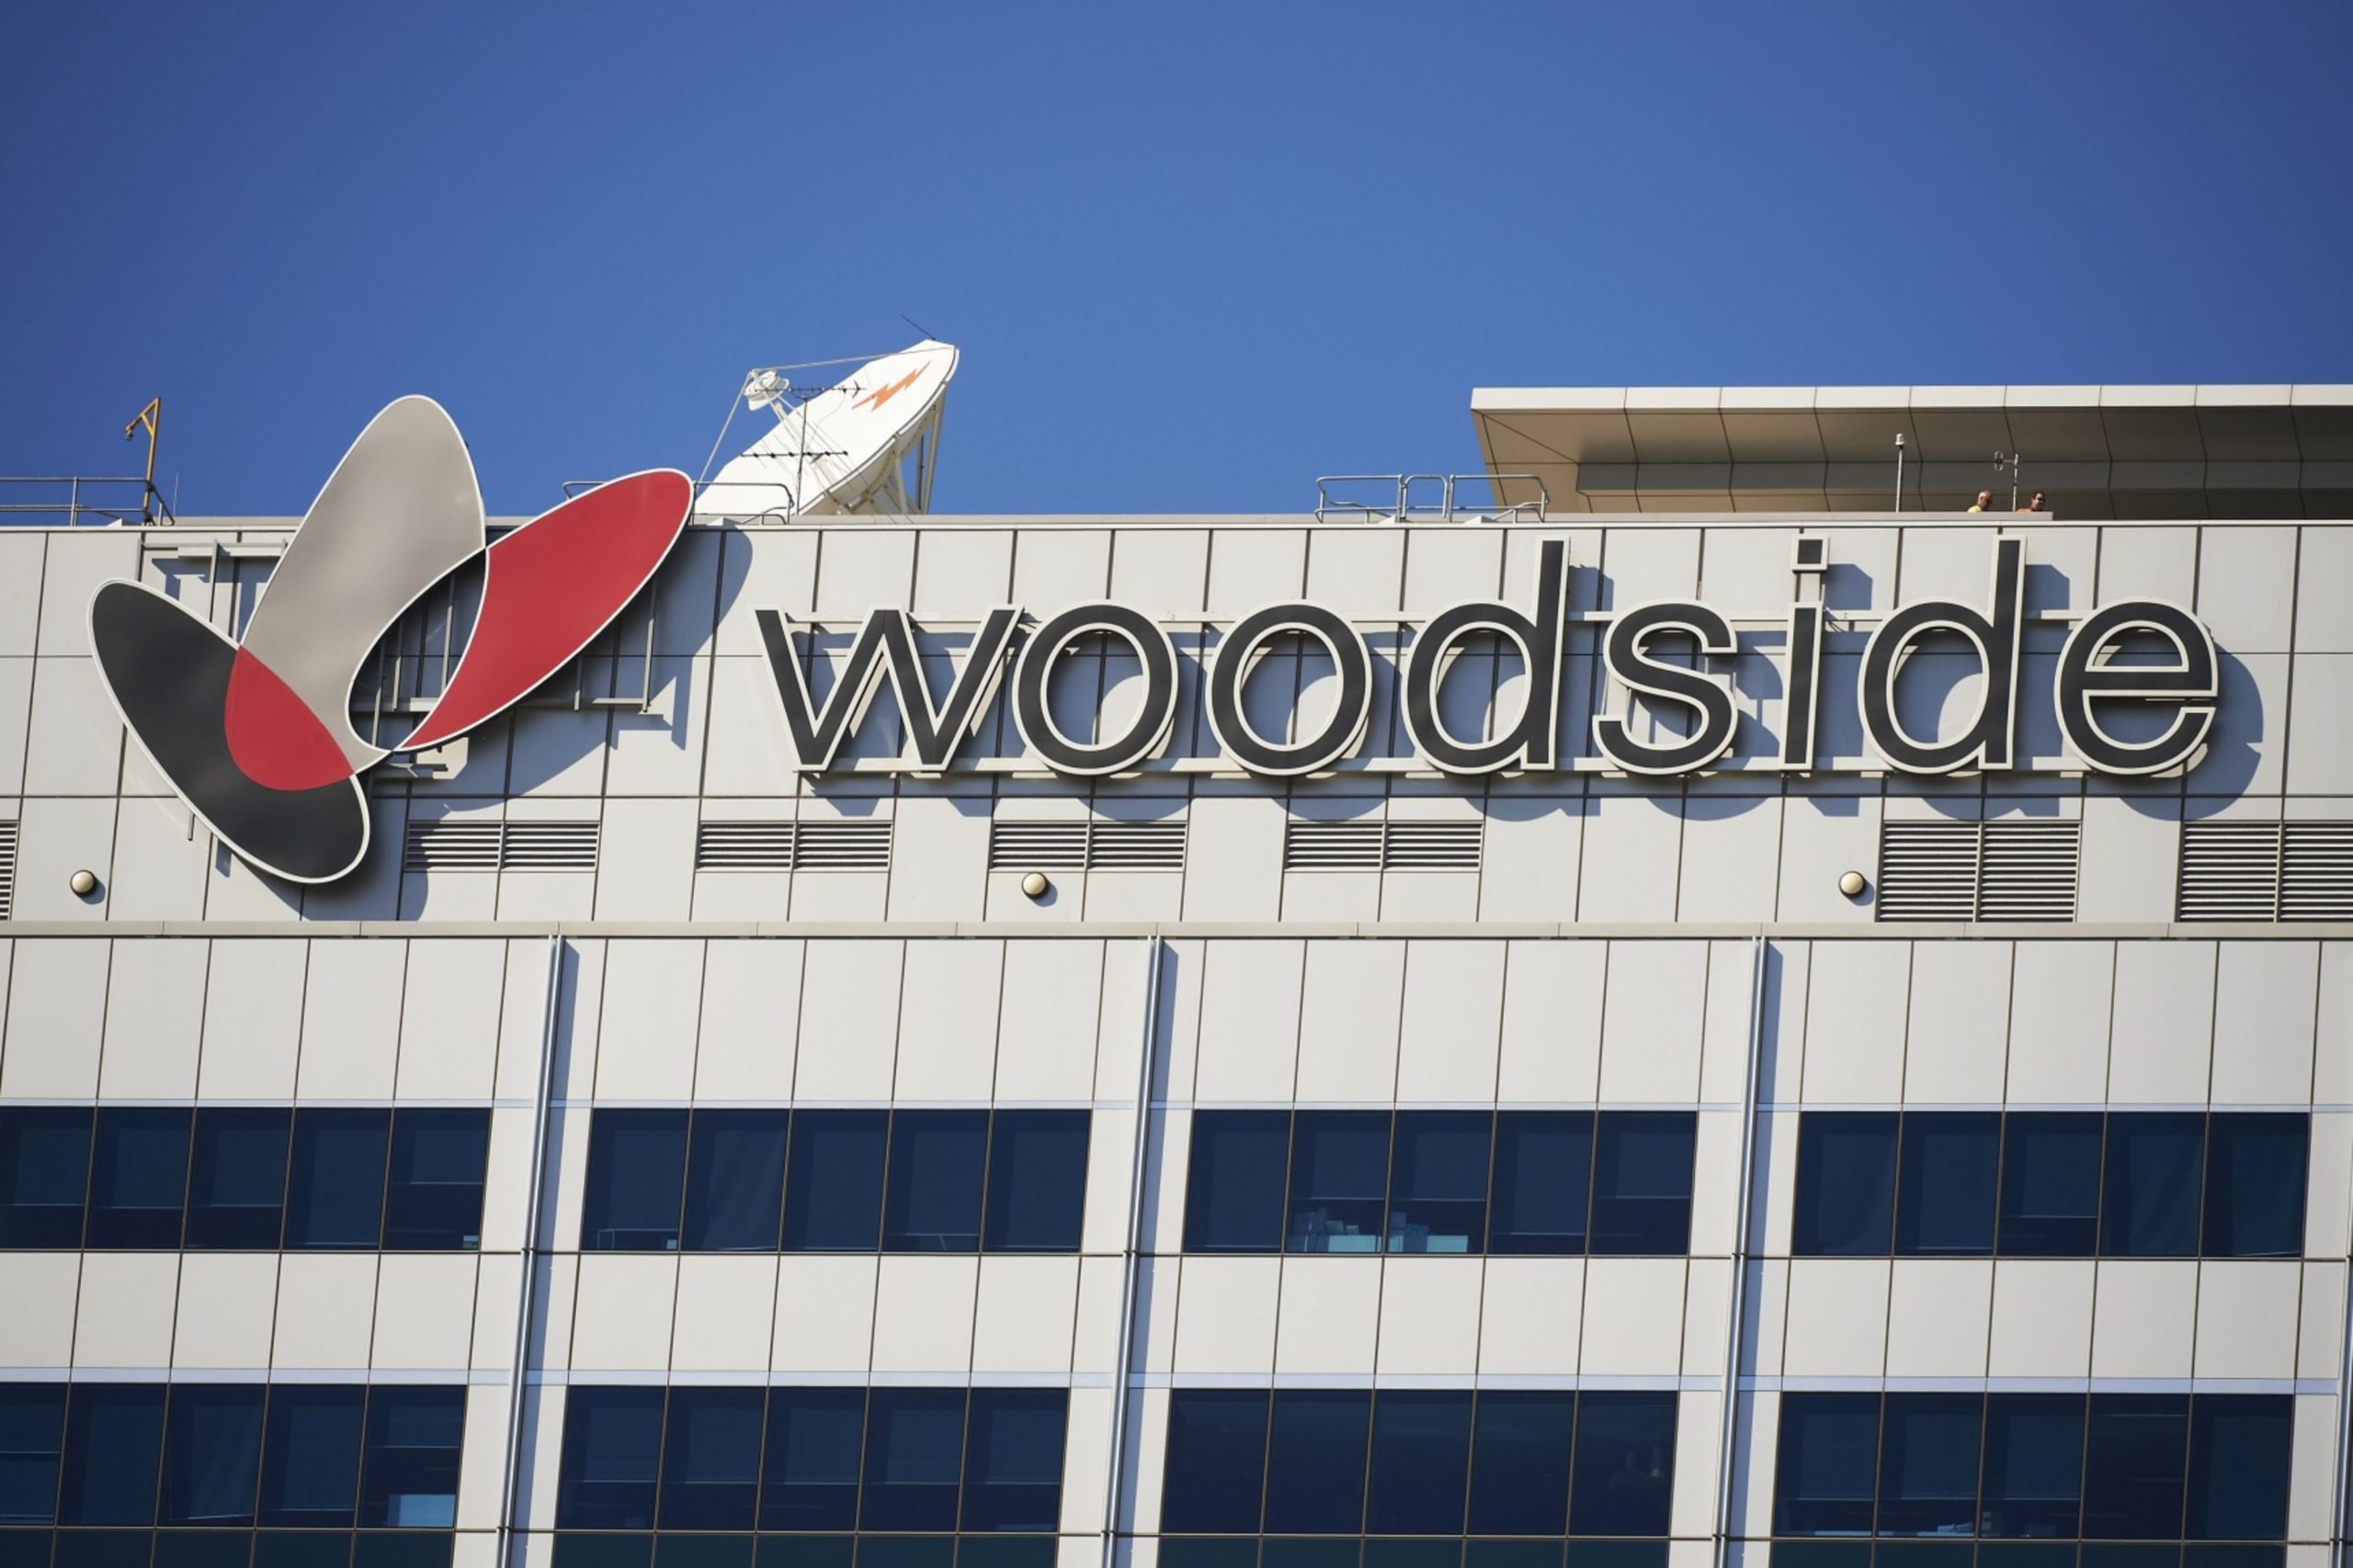 The Woodside Petroleum Ltd. logo is displayed atop the Woodside Plaza building, which houses the company's headquarters, in the central business district of Perth, Australia.